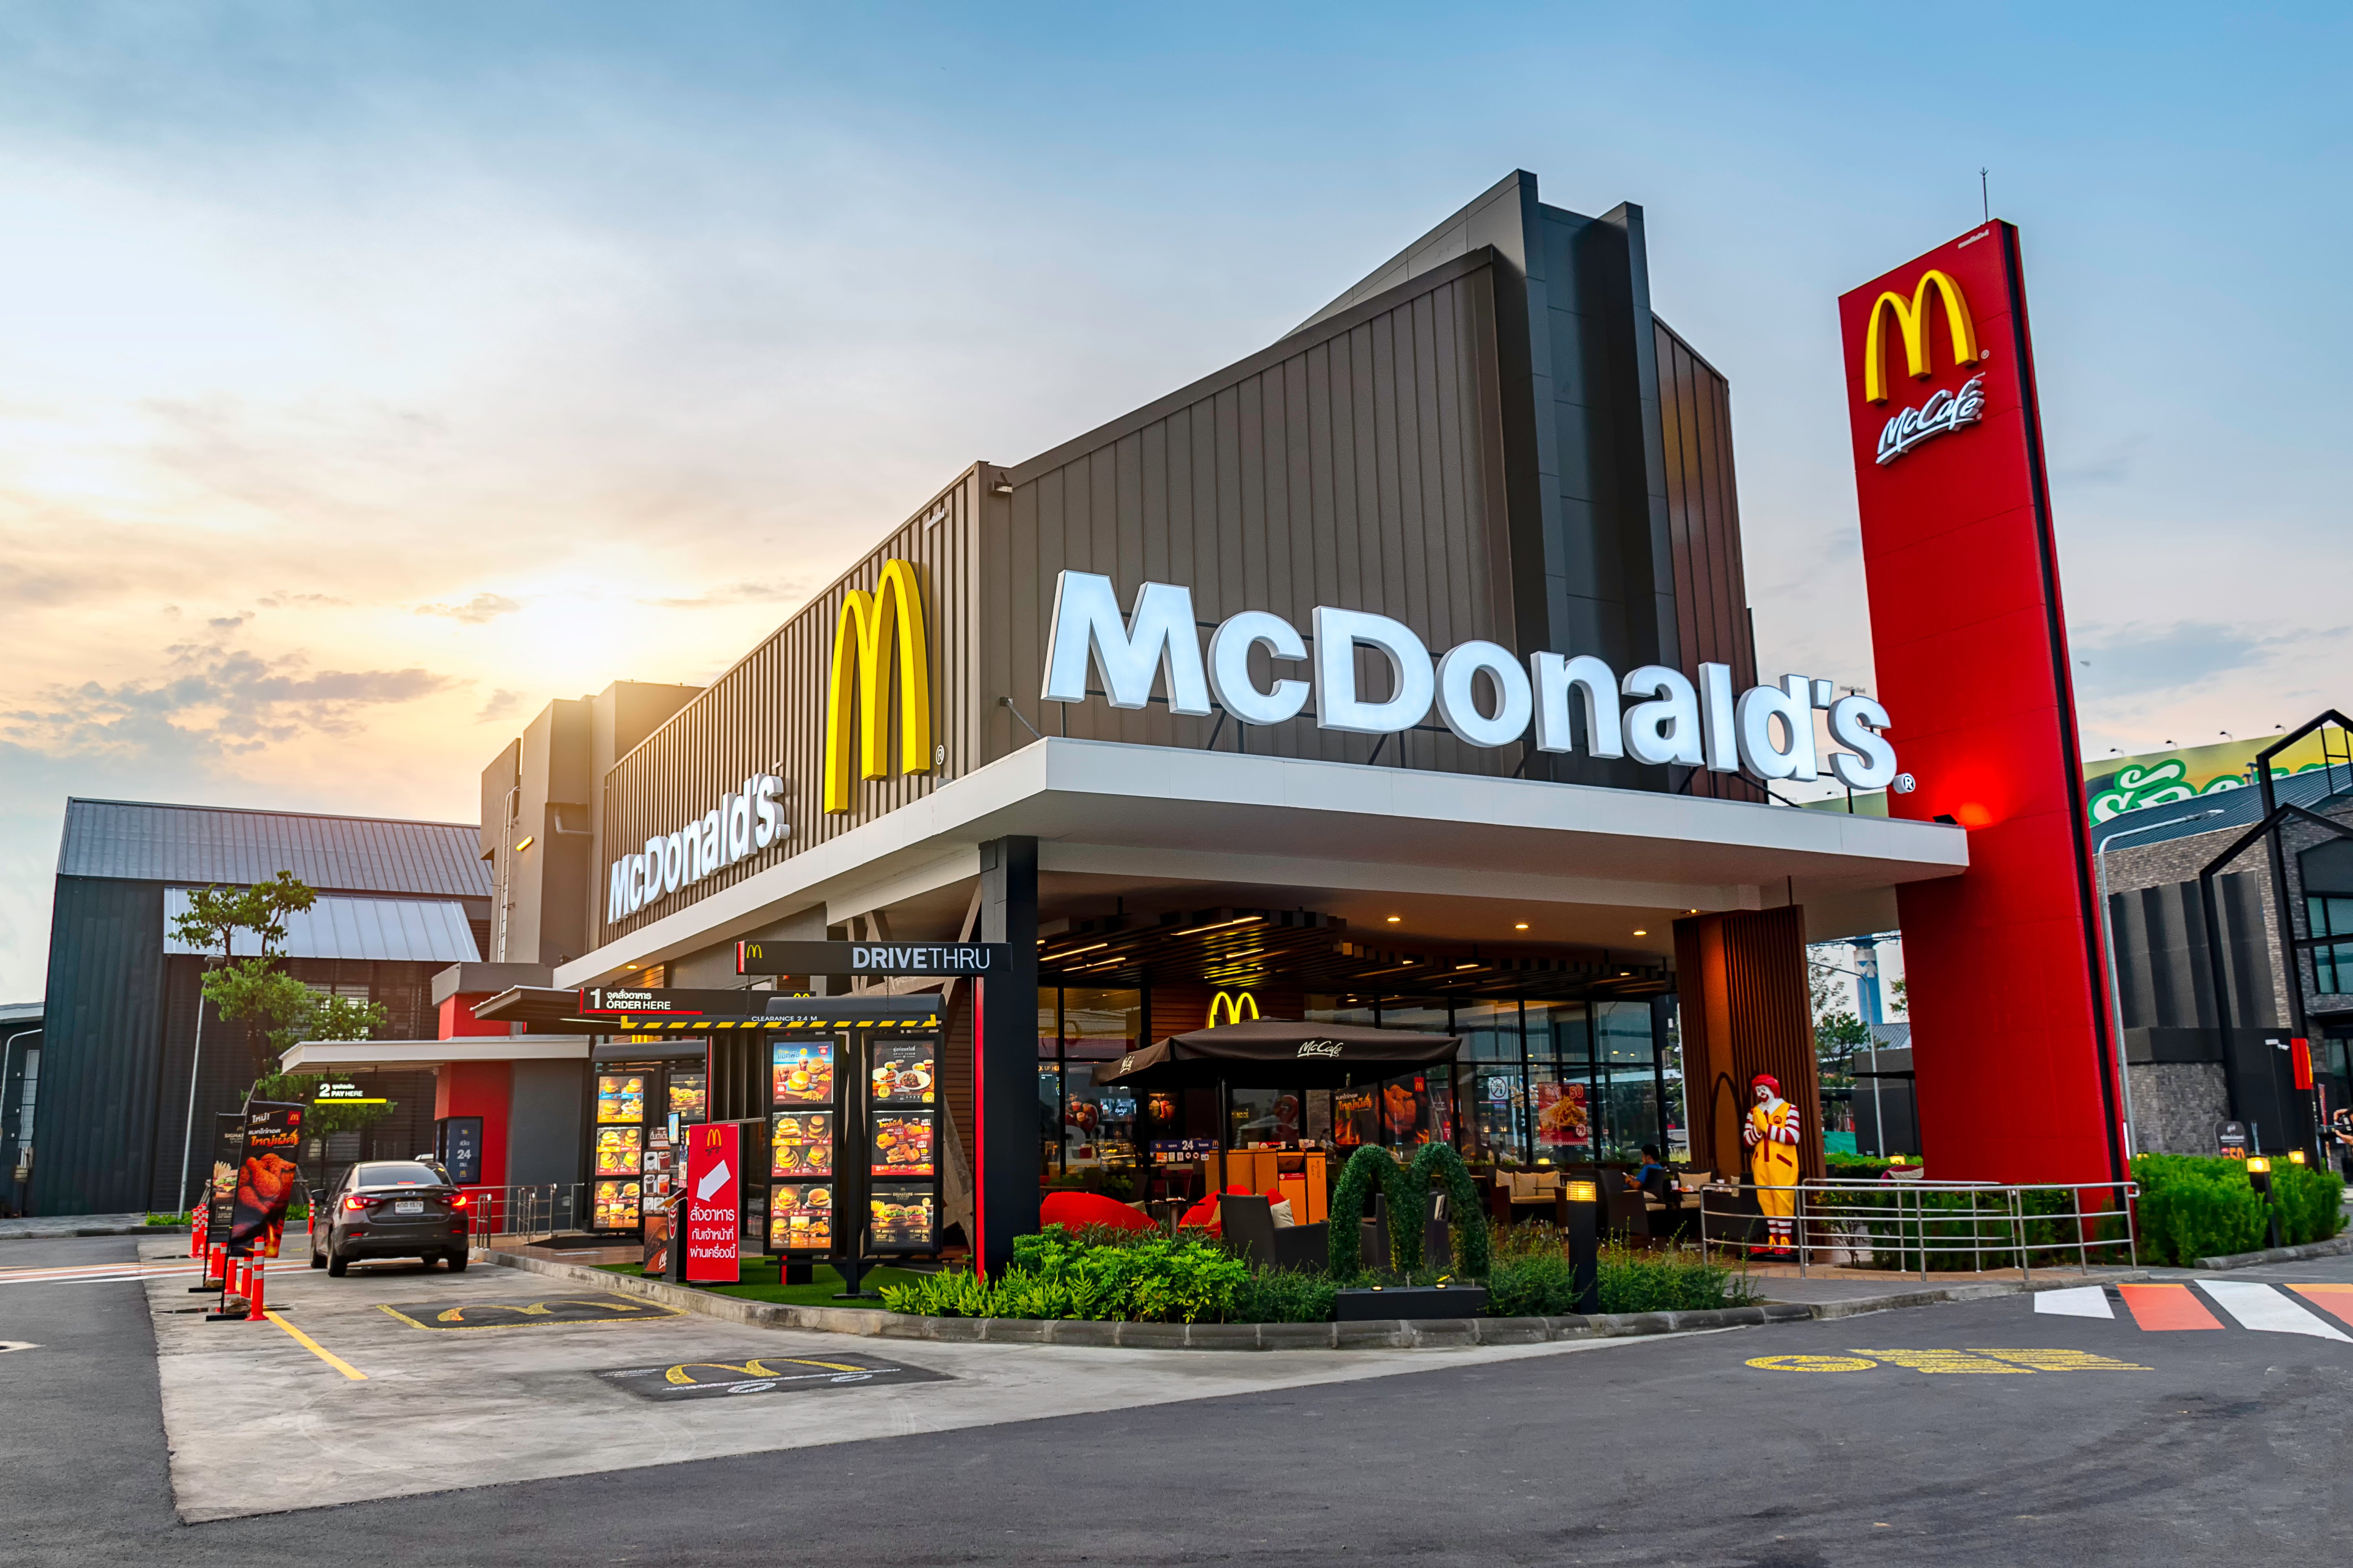 A McDonald's outlet during the day | Photo: Shutterstock